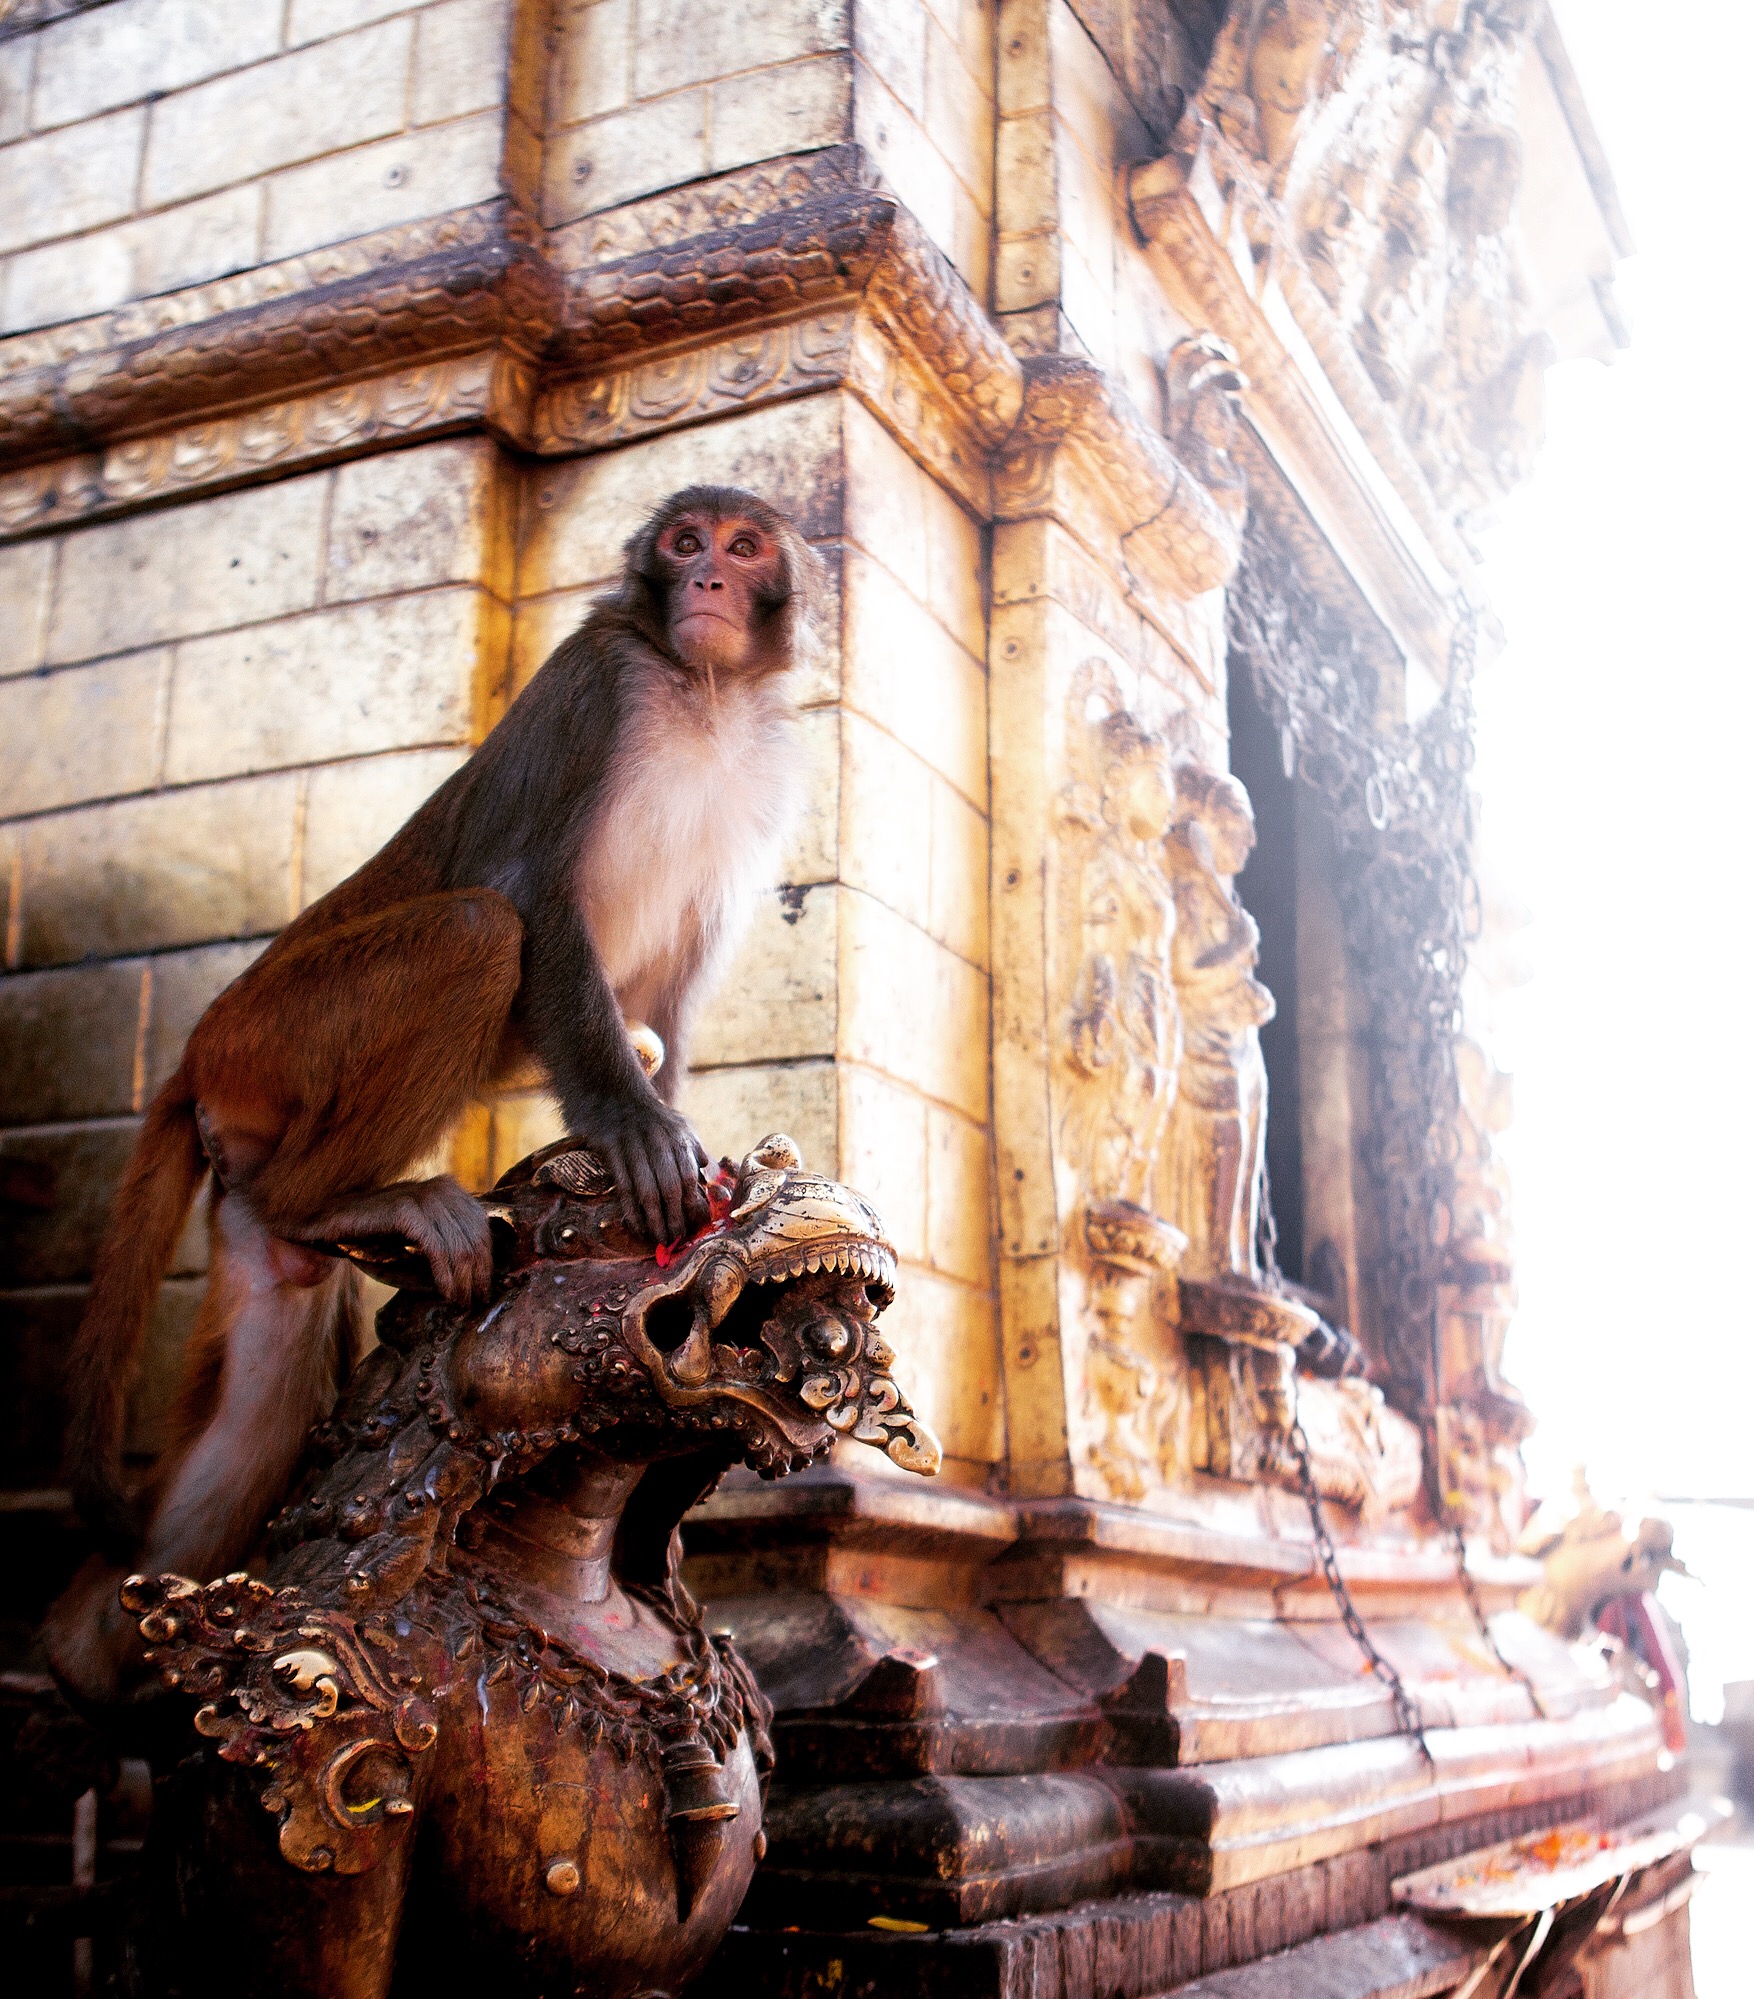 Nov 16.2, 2016Swayambhunath is one of the most sacred Buddhist pilgrimage sites in the world. It sits central to, yet high above Kathmandu Valley. Also known as the Monkey Temple, wild macaques roam the temple grounds as holy figures, the result of …